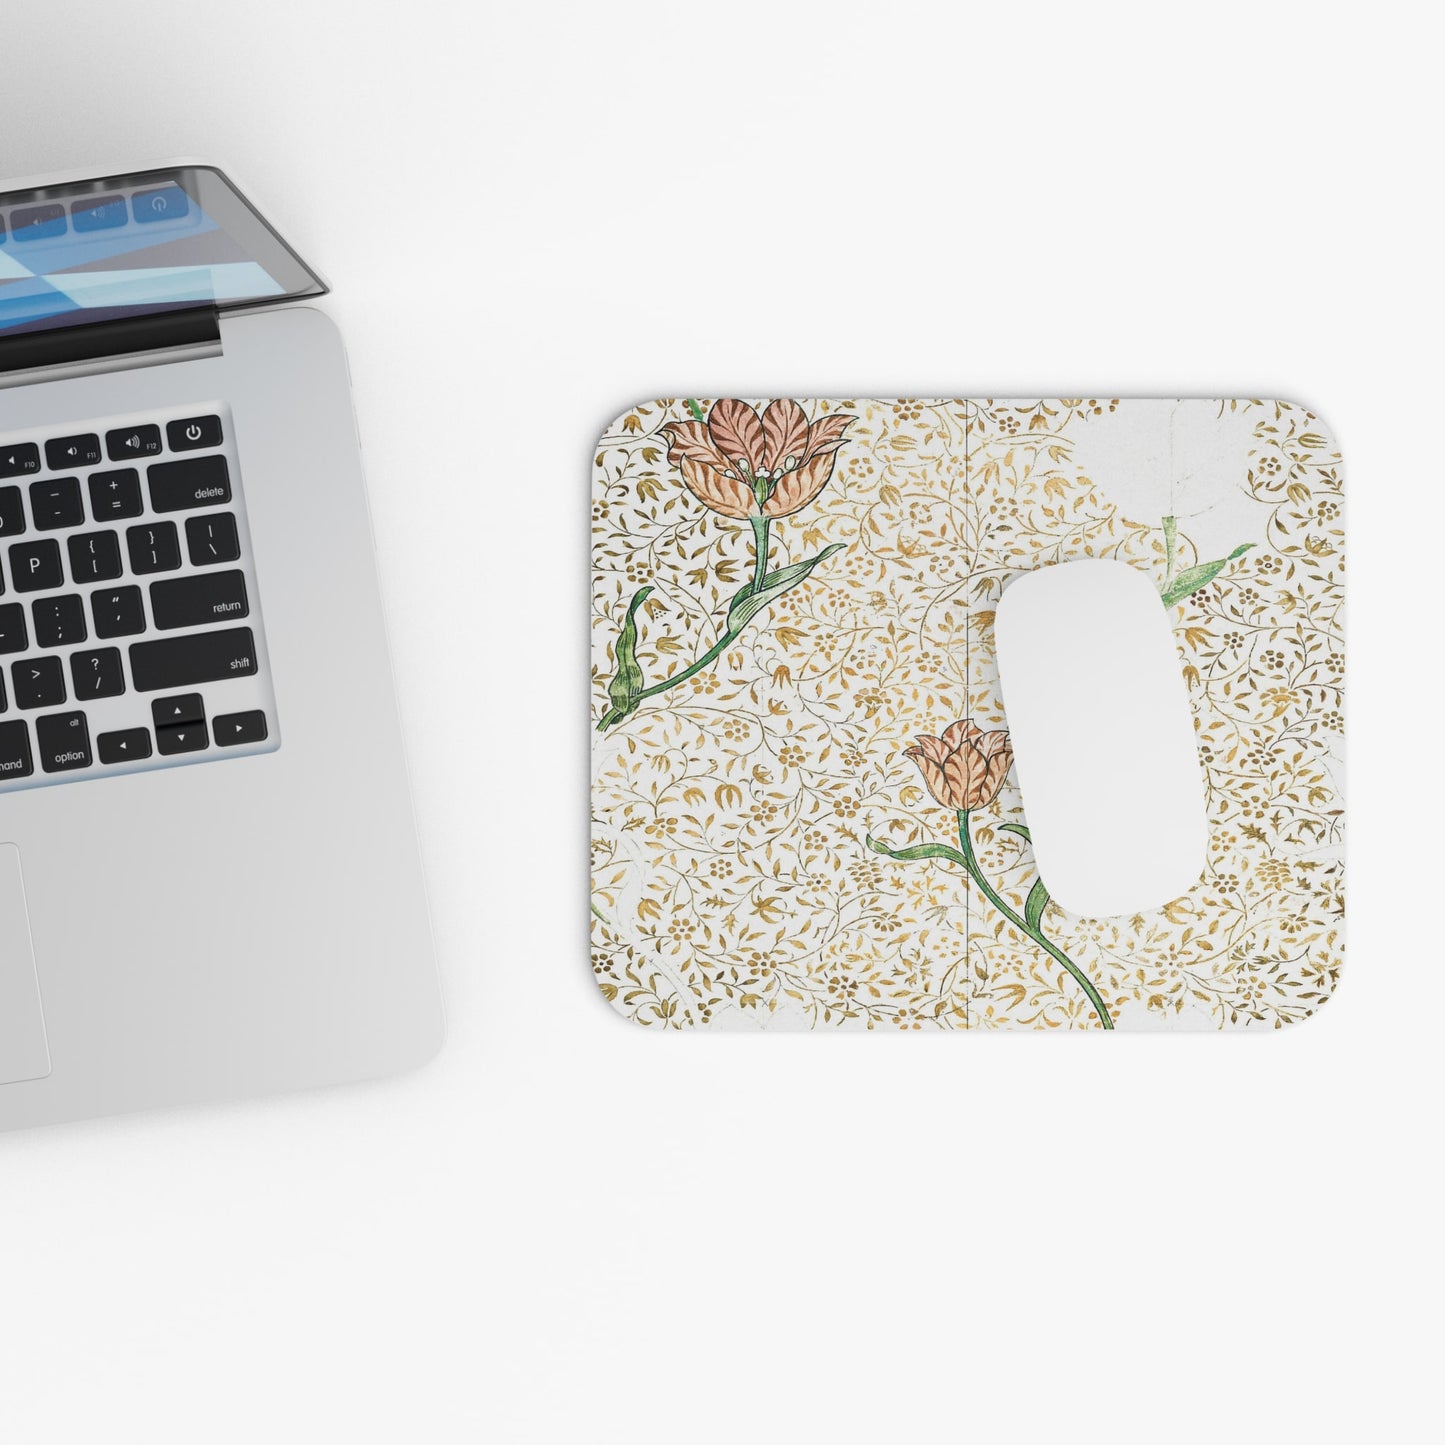 Vintage Aesthetic Floral Design Laptop Mouse Pad with White Mouse